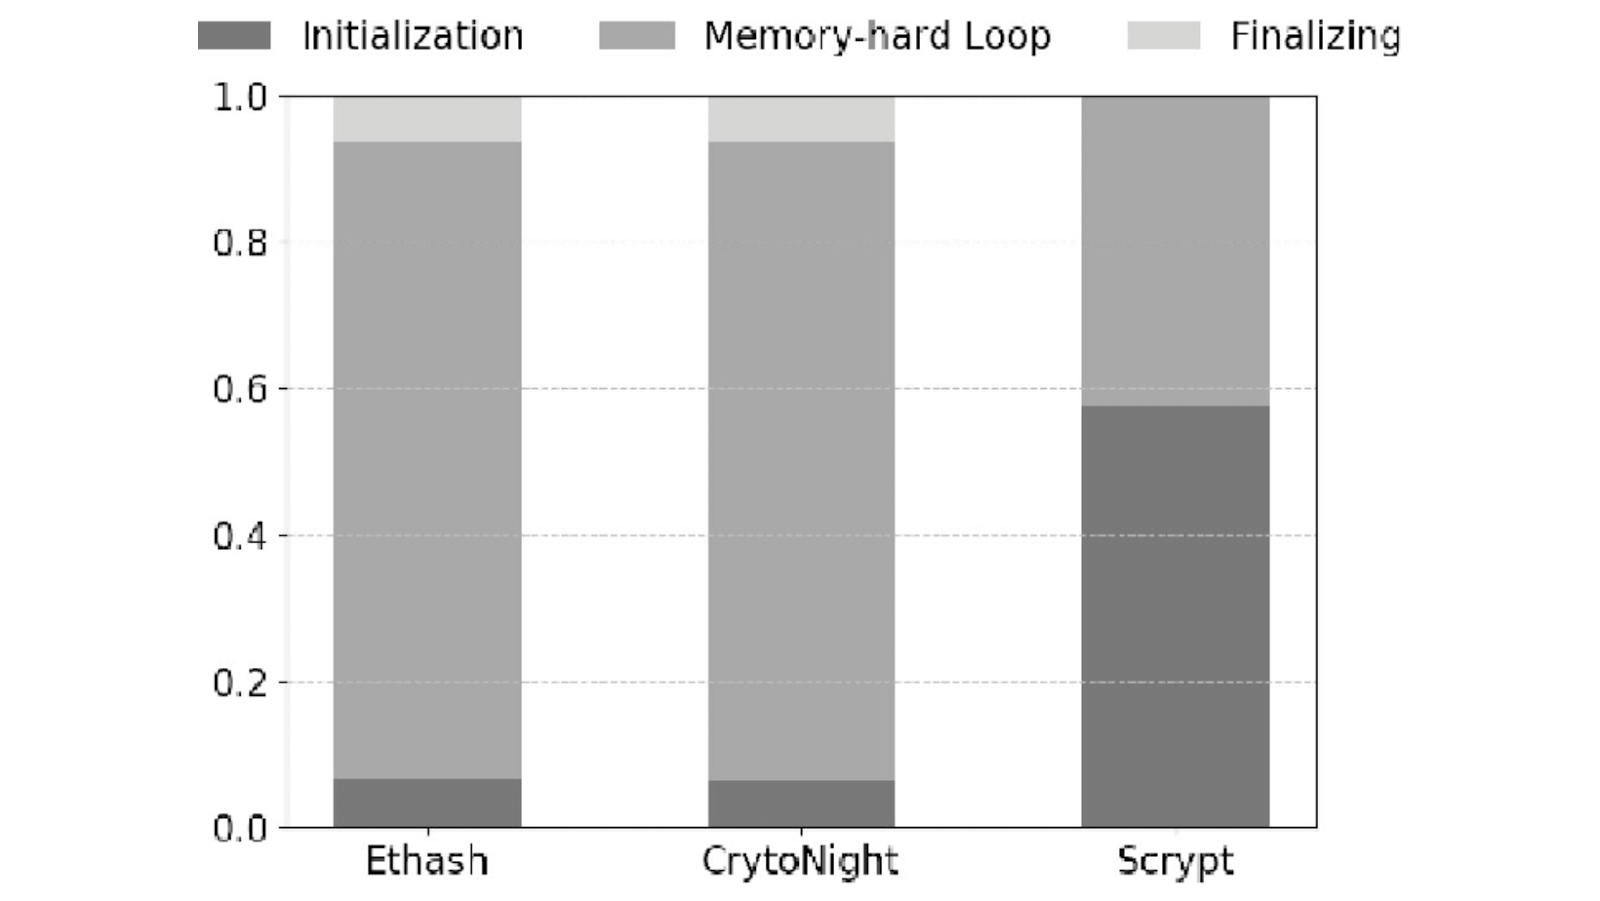 Execution time of Ethash, CryptoNight, and Scrypt.